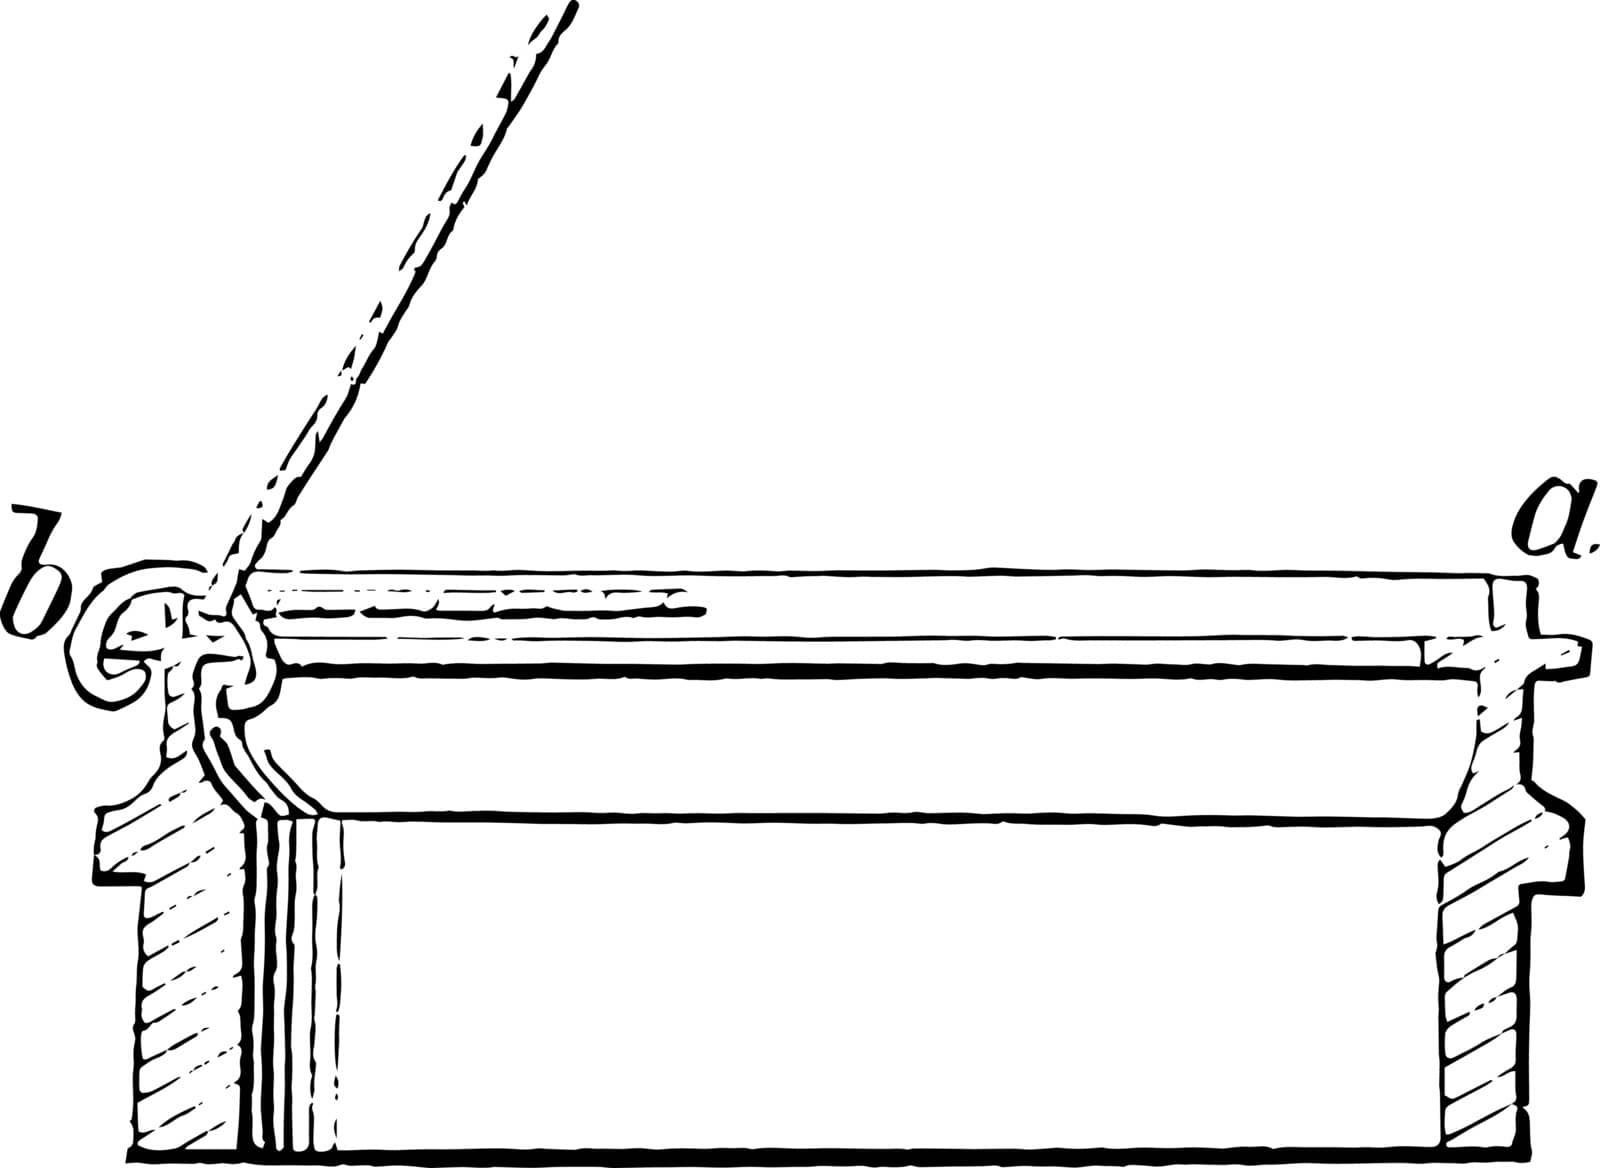 This illustration represents Meat Cutter which is used for meat cutting vintage line drawing or engraving illustration.